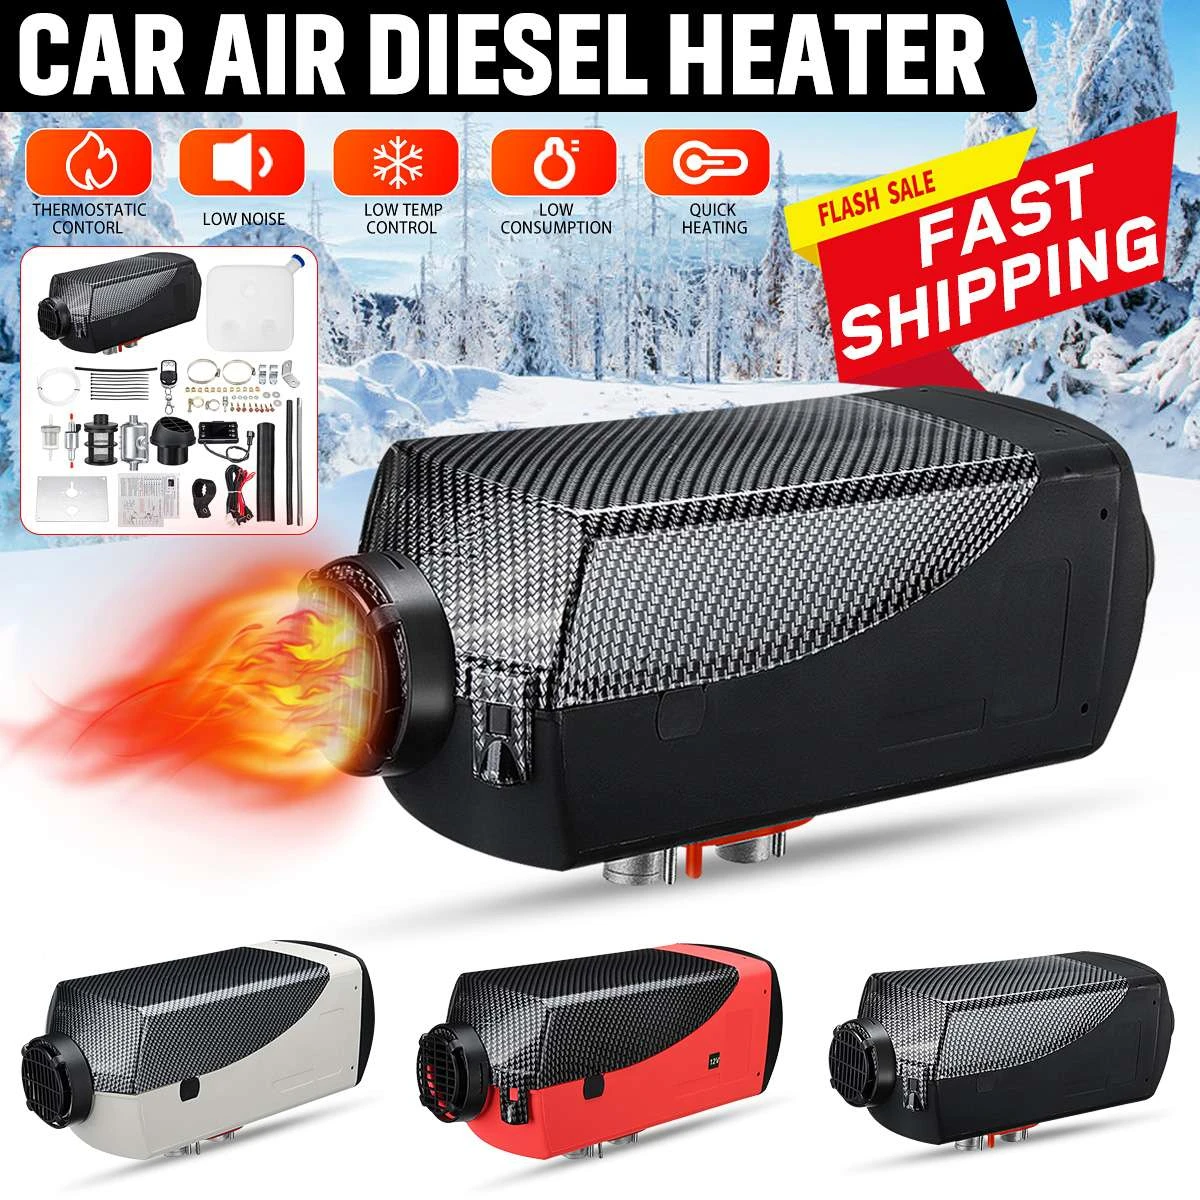 5KW 12V 5000W Air Autonomous Diesel Heater car heater Parking Heat With Remote Control for RV Motorhome Trailer Trucks Boat Car